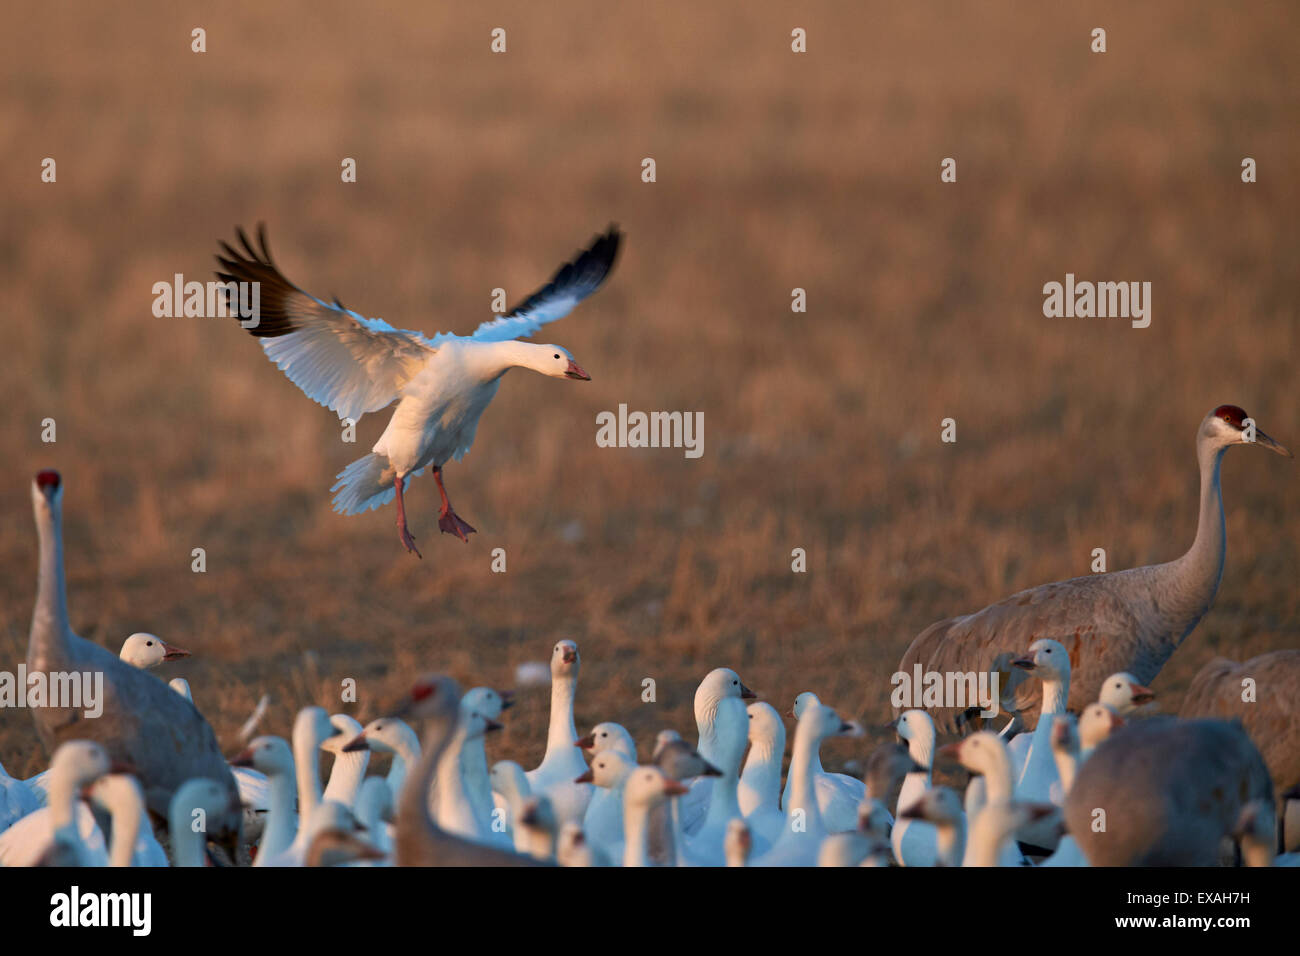 Snow goose (Chen caerulescens) landing, Bosque del Apache National Wildlife Refuge, New Mexico, United States of America Stock Photo